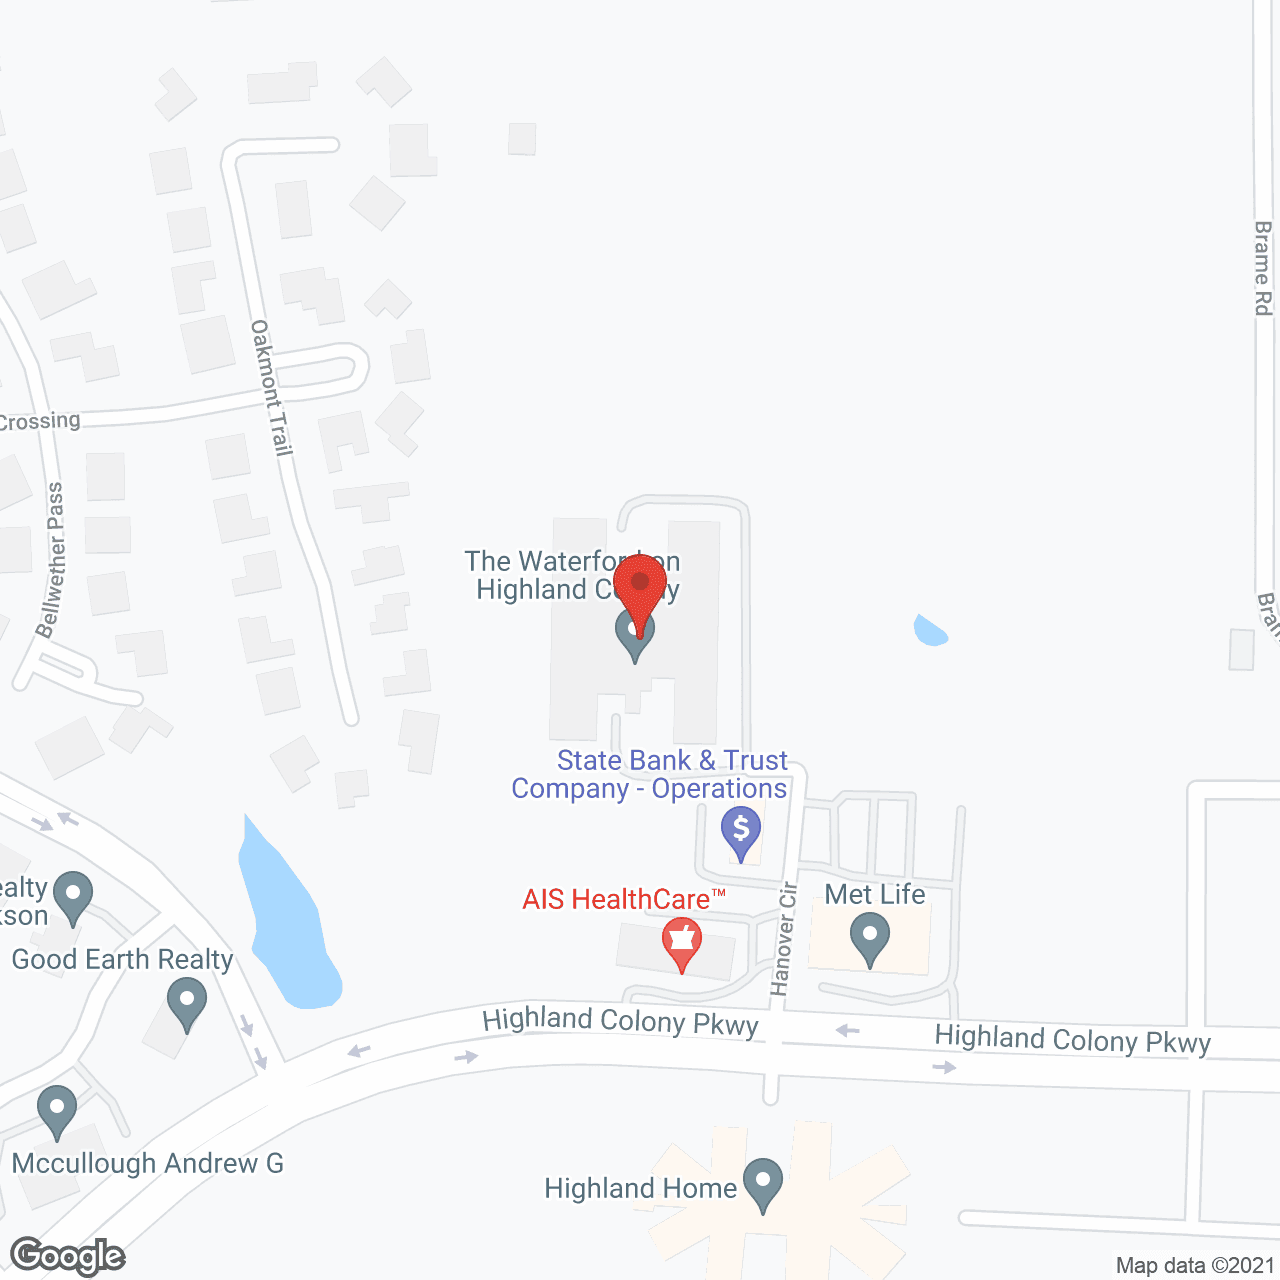 The Waterford on Highland Colony in google map